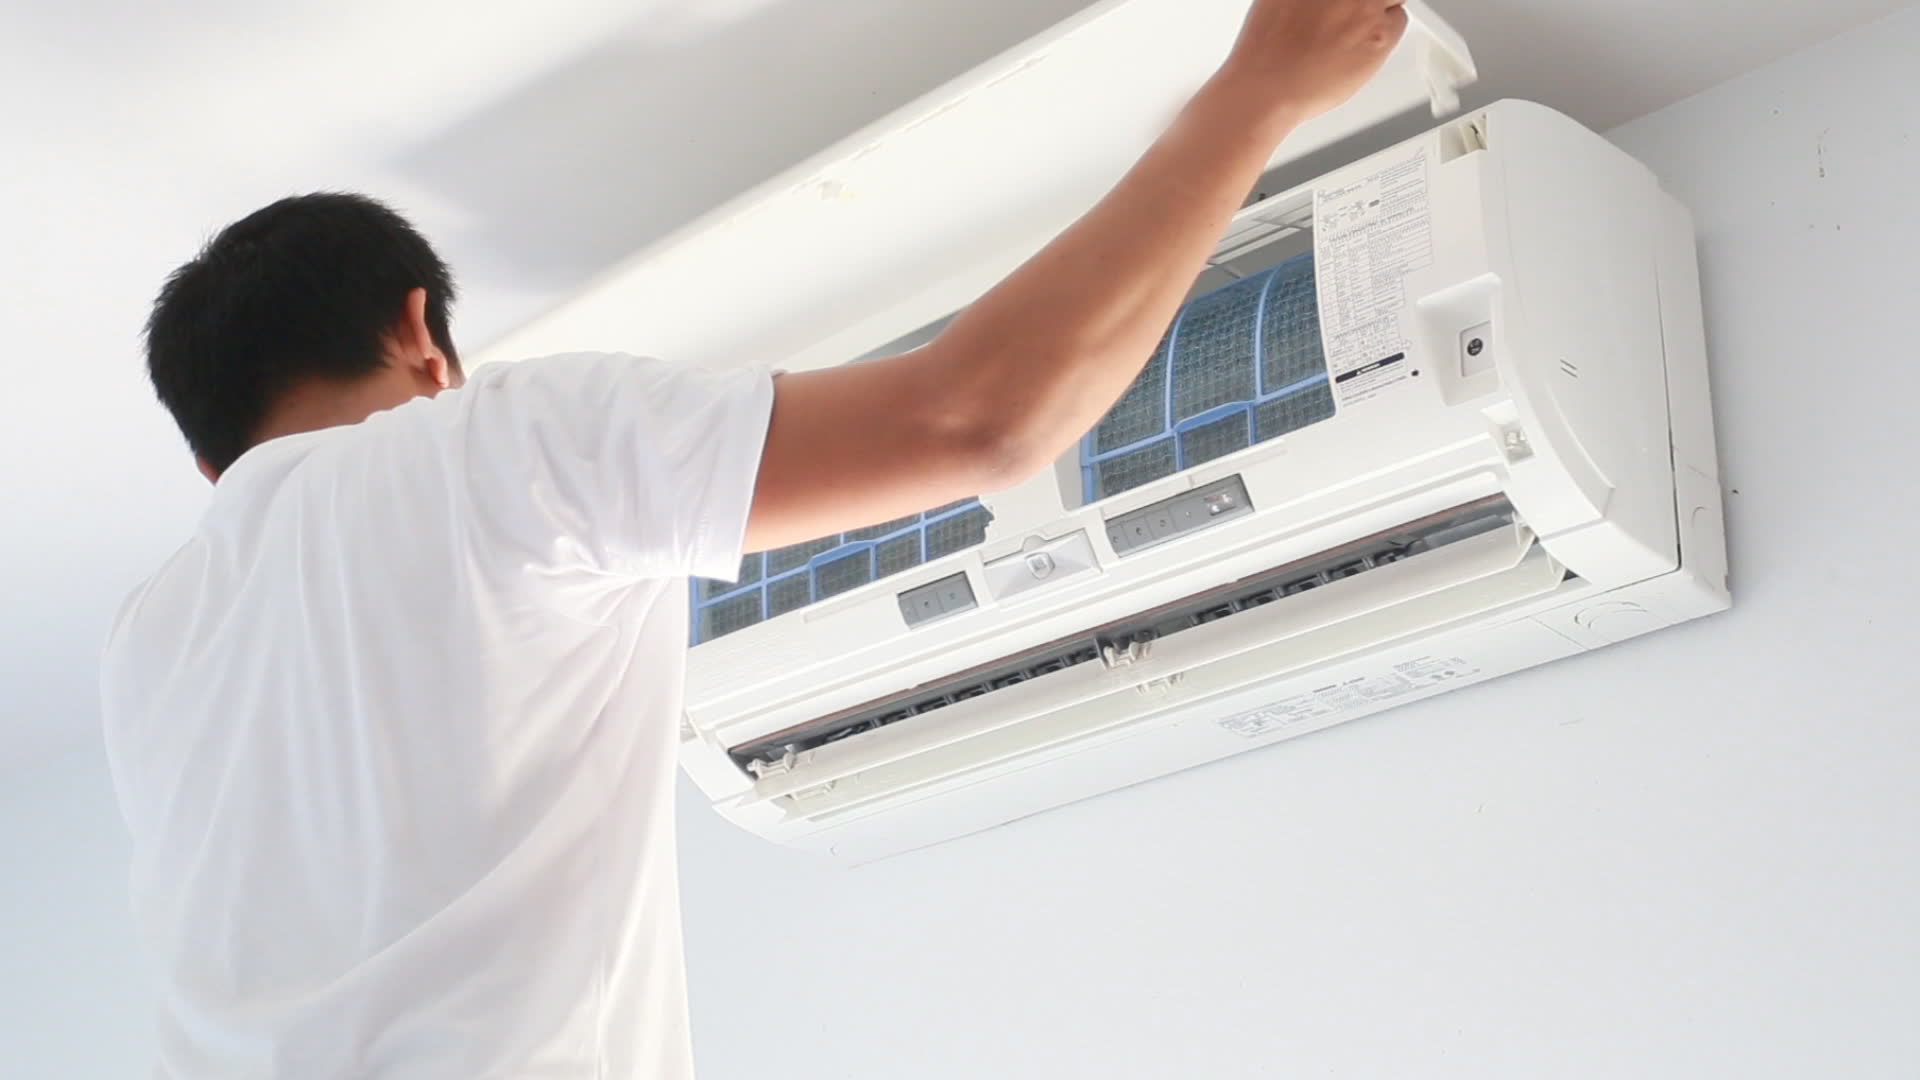 https://ateh.ro/wp-content/uploads/2019/05/air-conditioning-service.jpg